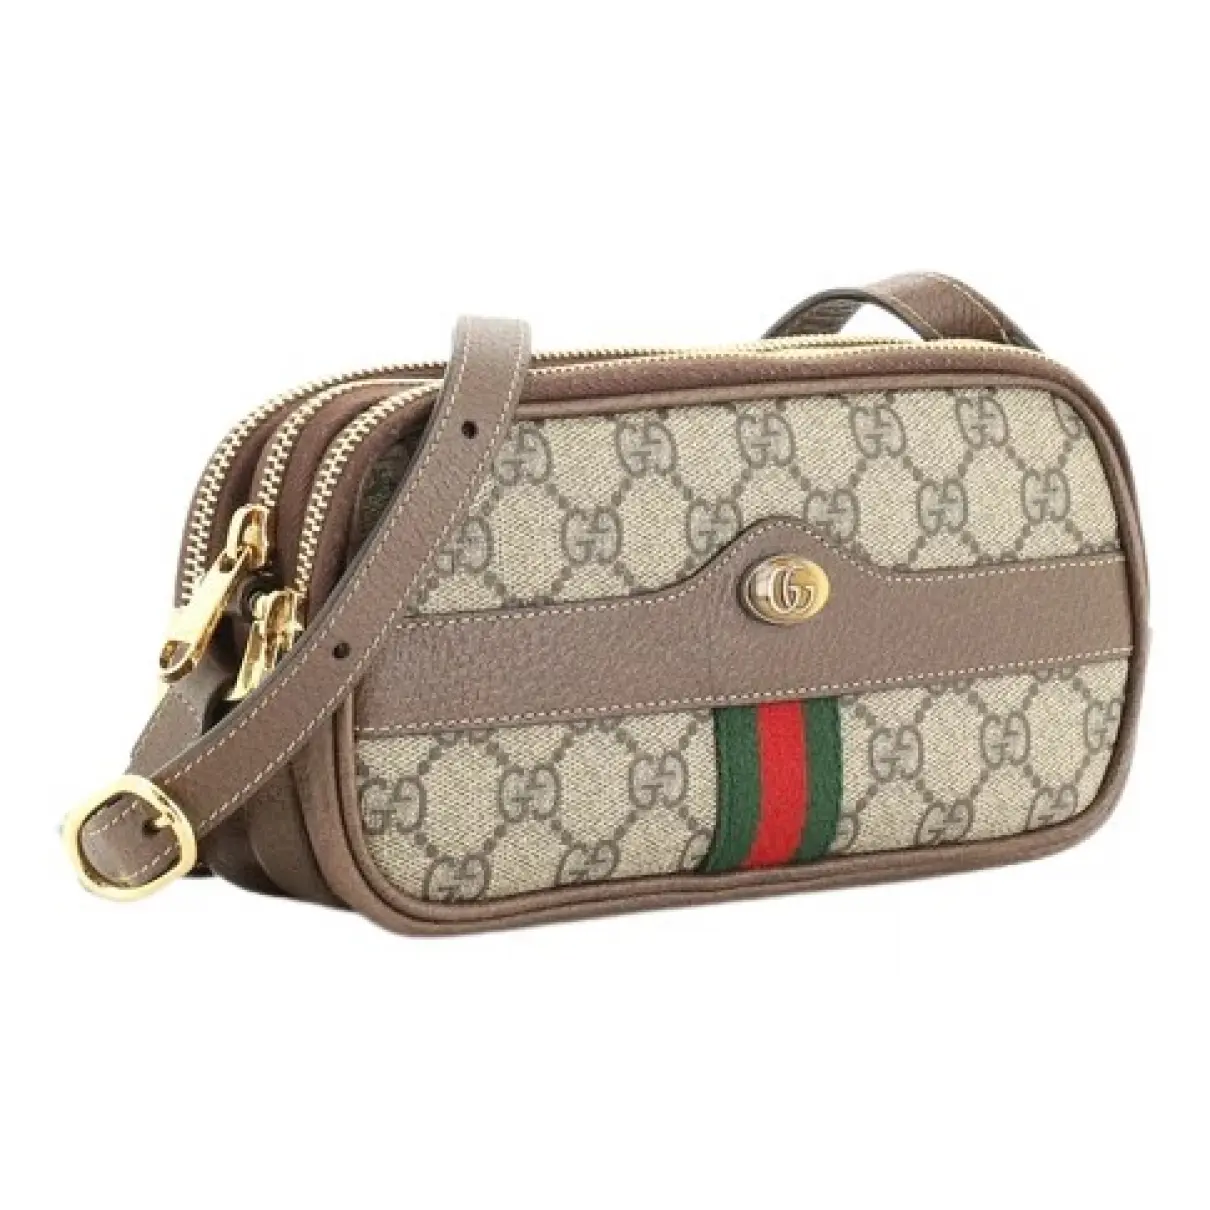 Ophidia GG leather crossbody bag Gucci